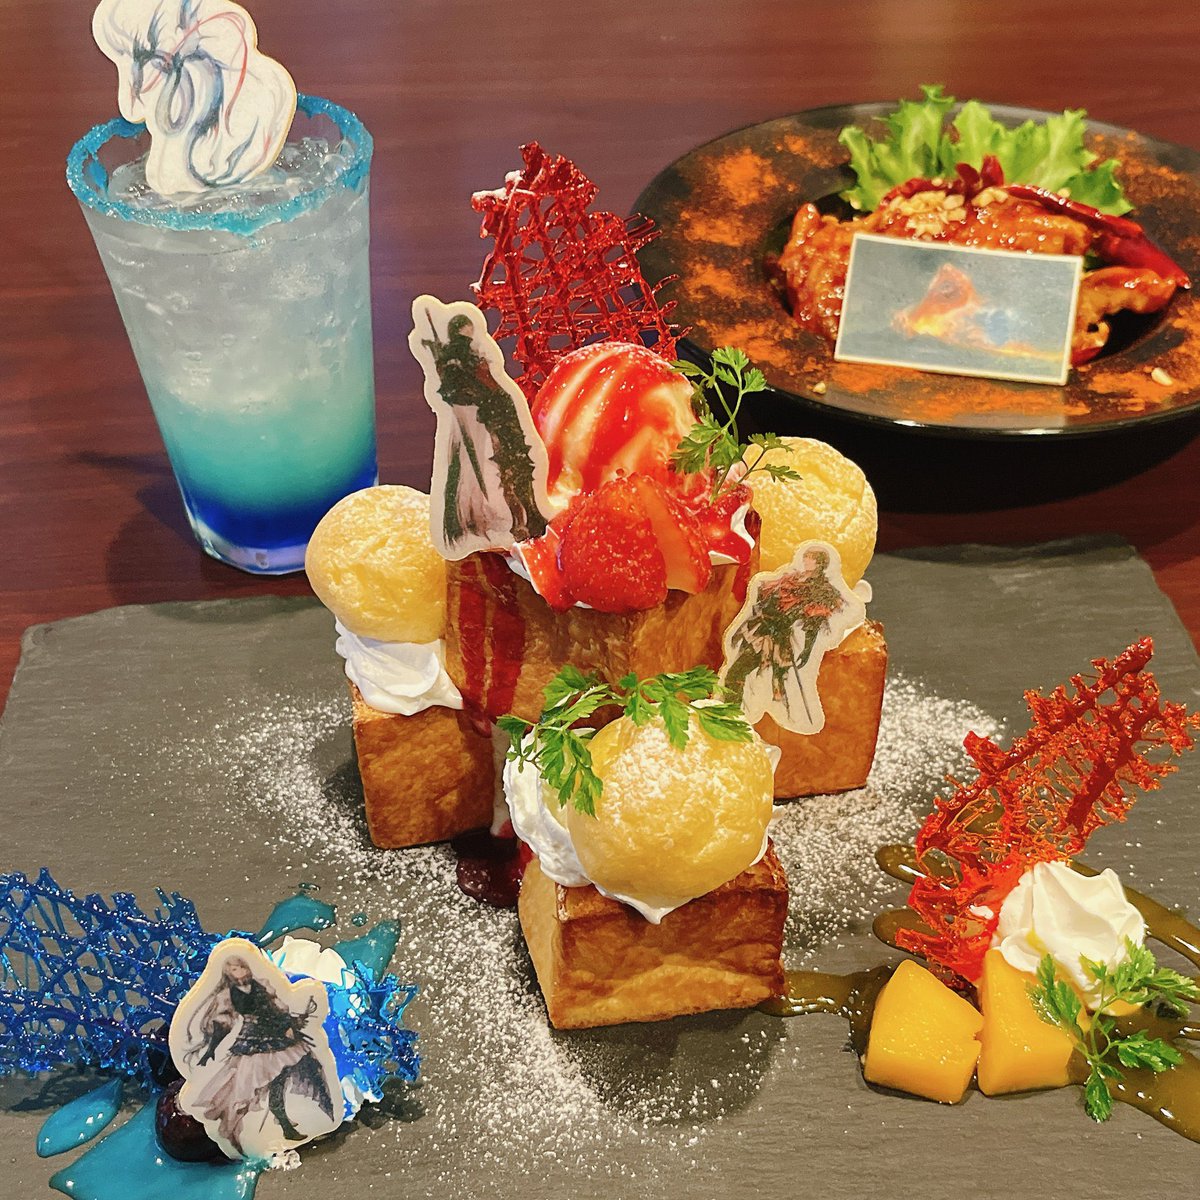 FF16 “Road to Mysidia” honey toast looks AMAZING? New FF16 Rising Tide DLC menu will be available at the Pasela karaoke resort in Akihabara includes the honey toast, Leviathan drink, and Drake’s Head chicken! 🔥🔥